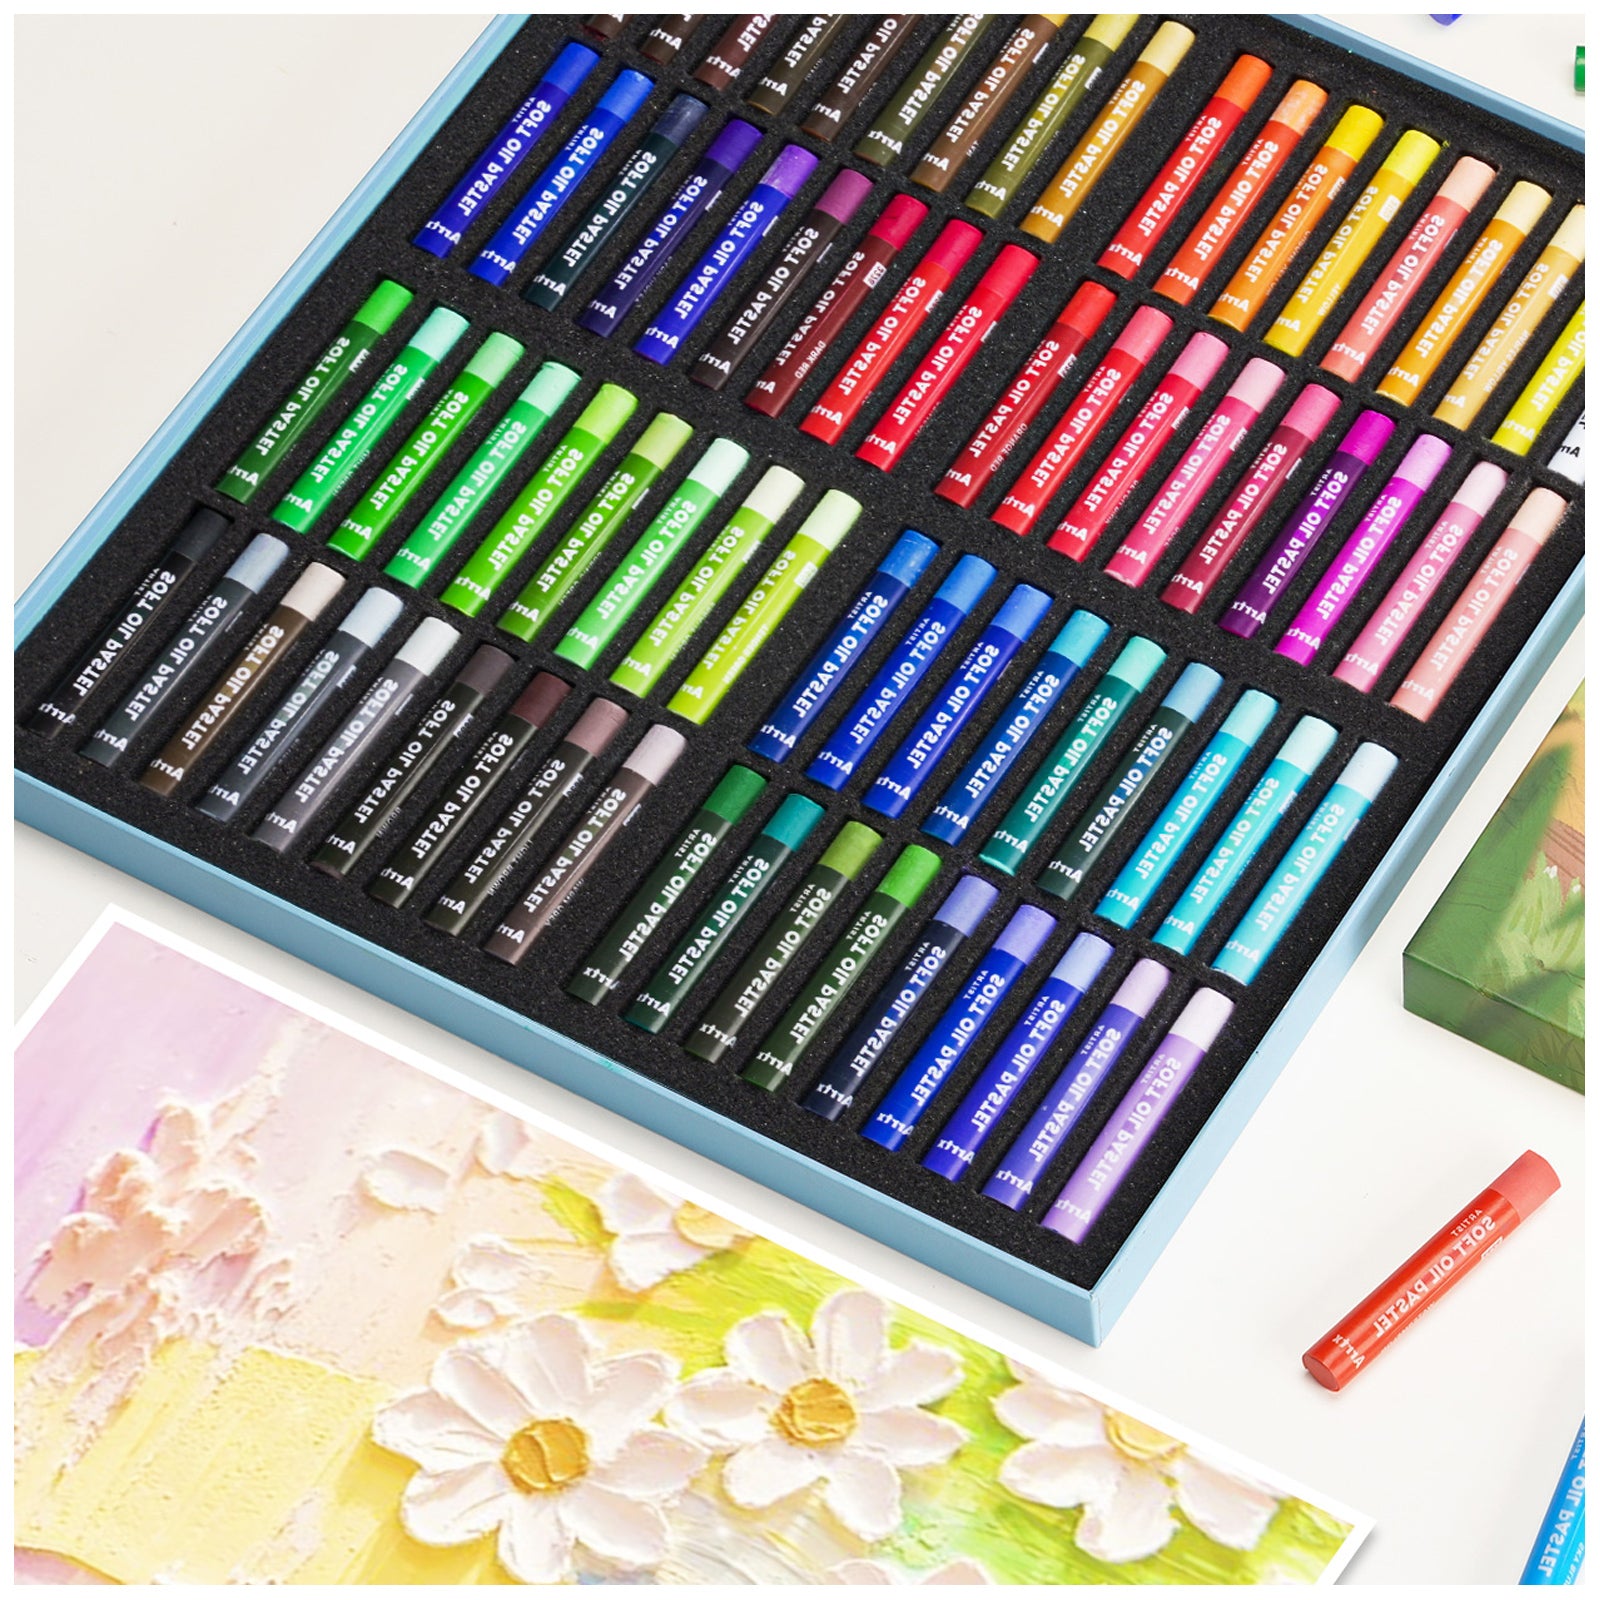 Arrtx Art Supplies on Instagram: 🎉 GIVEAWAY ALERT! 🎉 Arrtx is thrilled  to announce the upcoming release of our brand-new acrylic marker set, and  we want YOU to be among the first